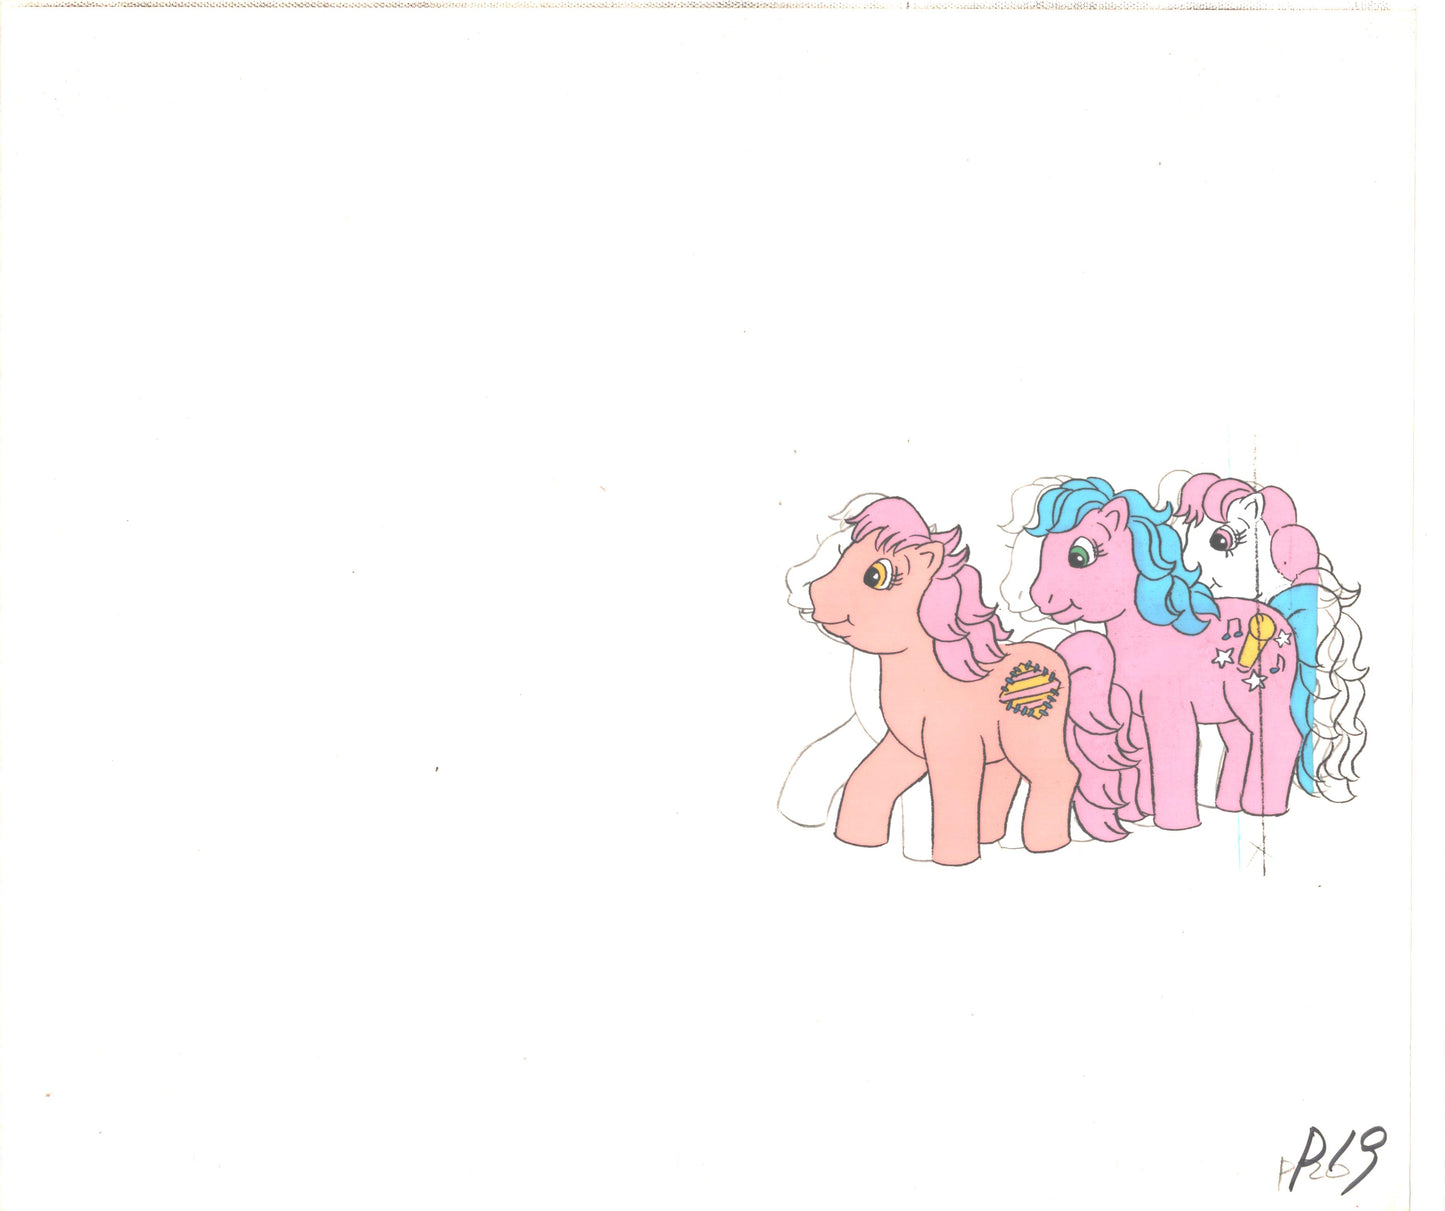 My Little Pony Original Production Animation Cel Hasbro Sunbow 1980s or 90s Used to Make the Cartoon G-P19